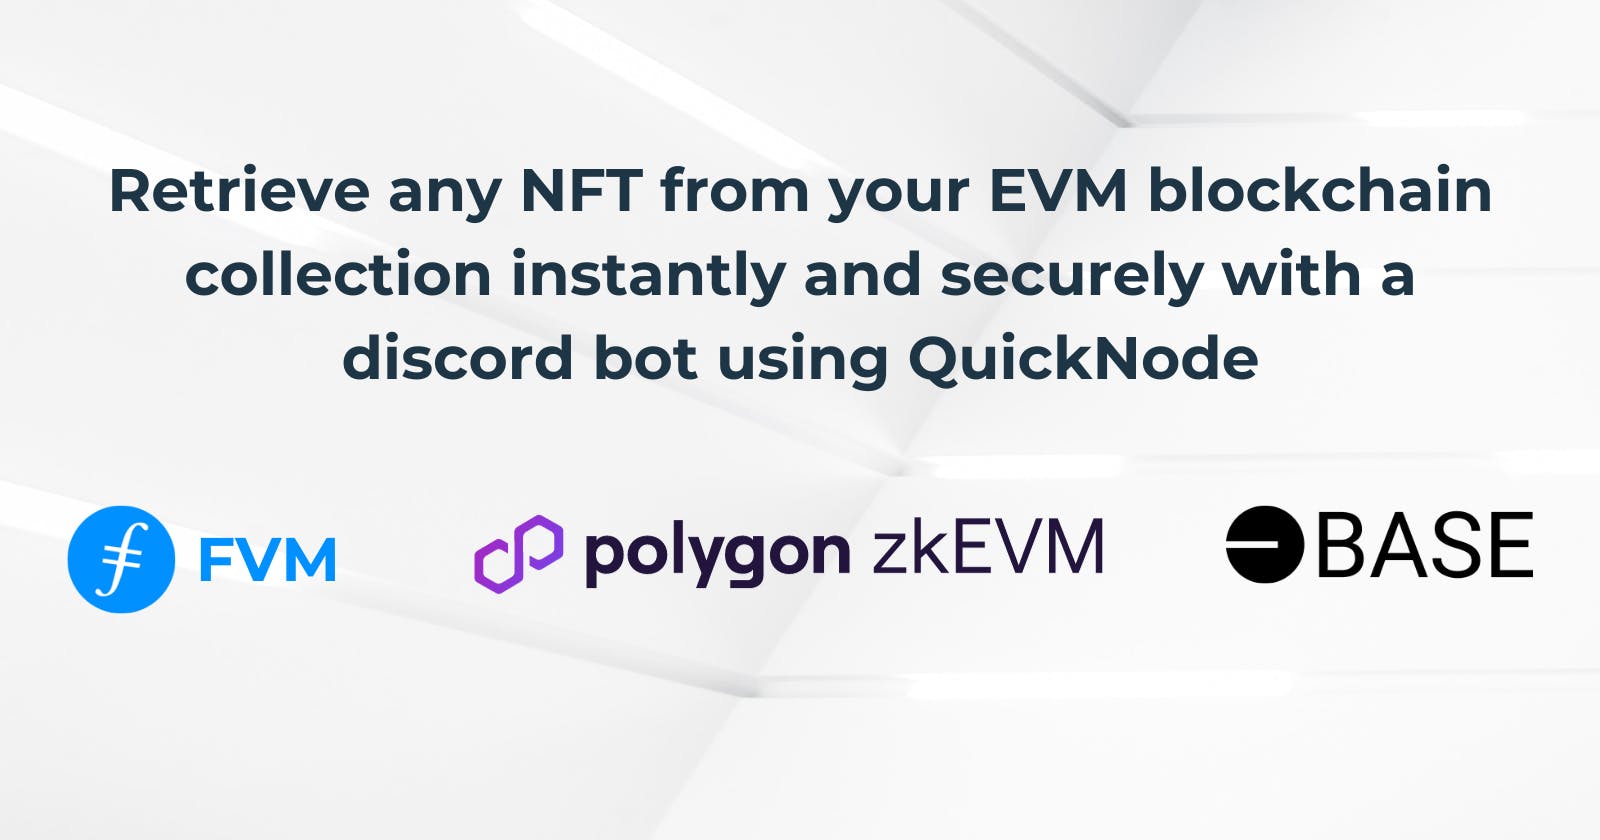 Retrieve any NFT from your EVM blockchain collection instantly and securely with a discord bot using QuickNode